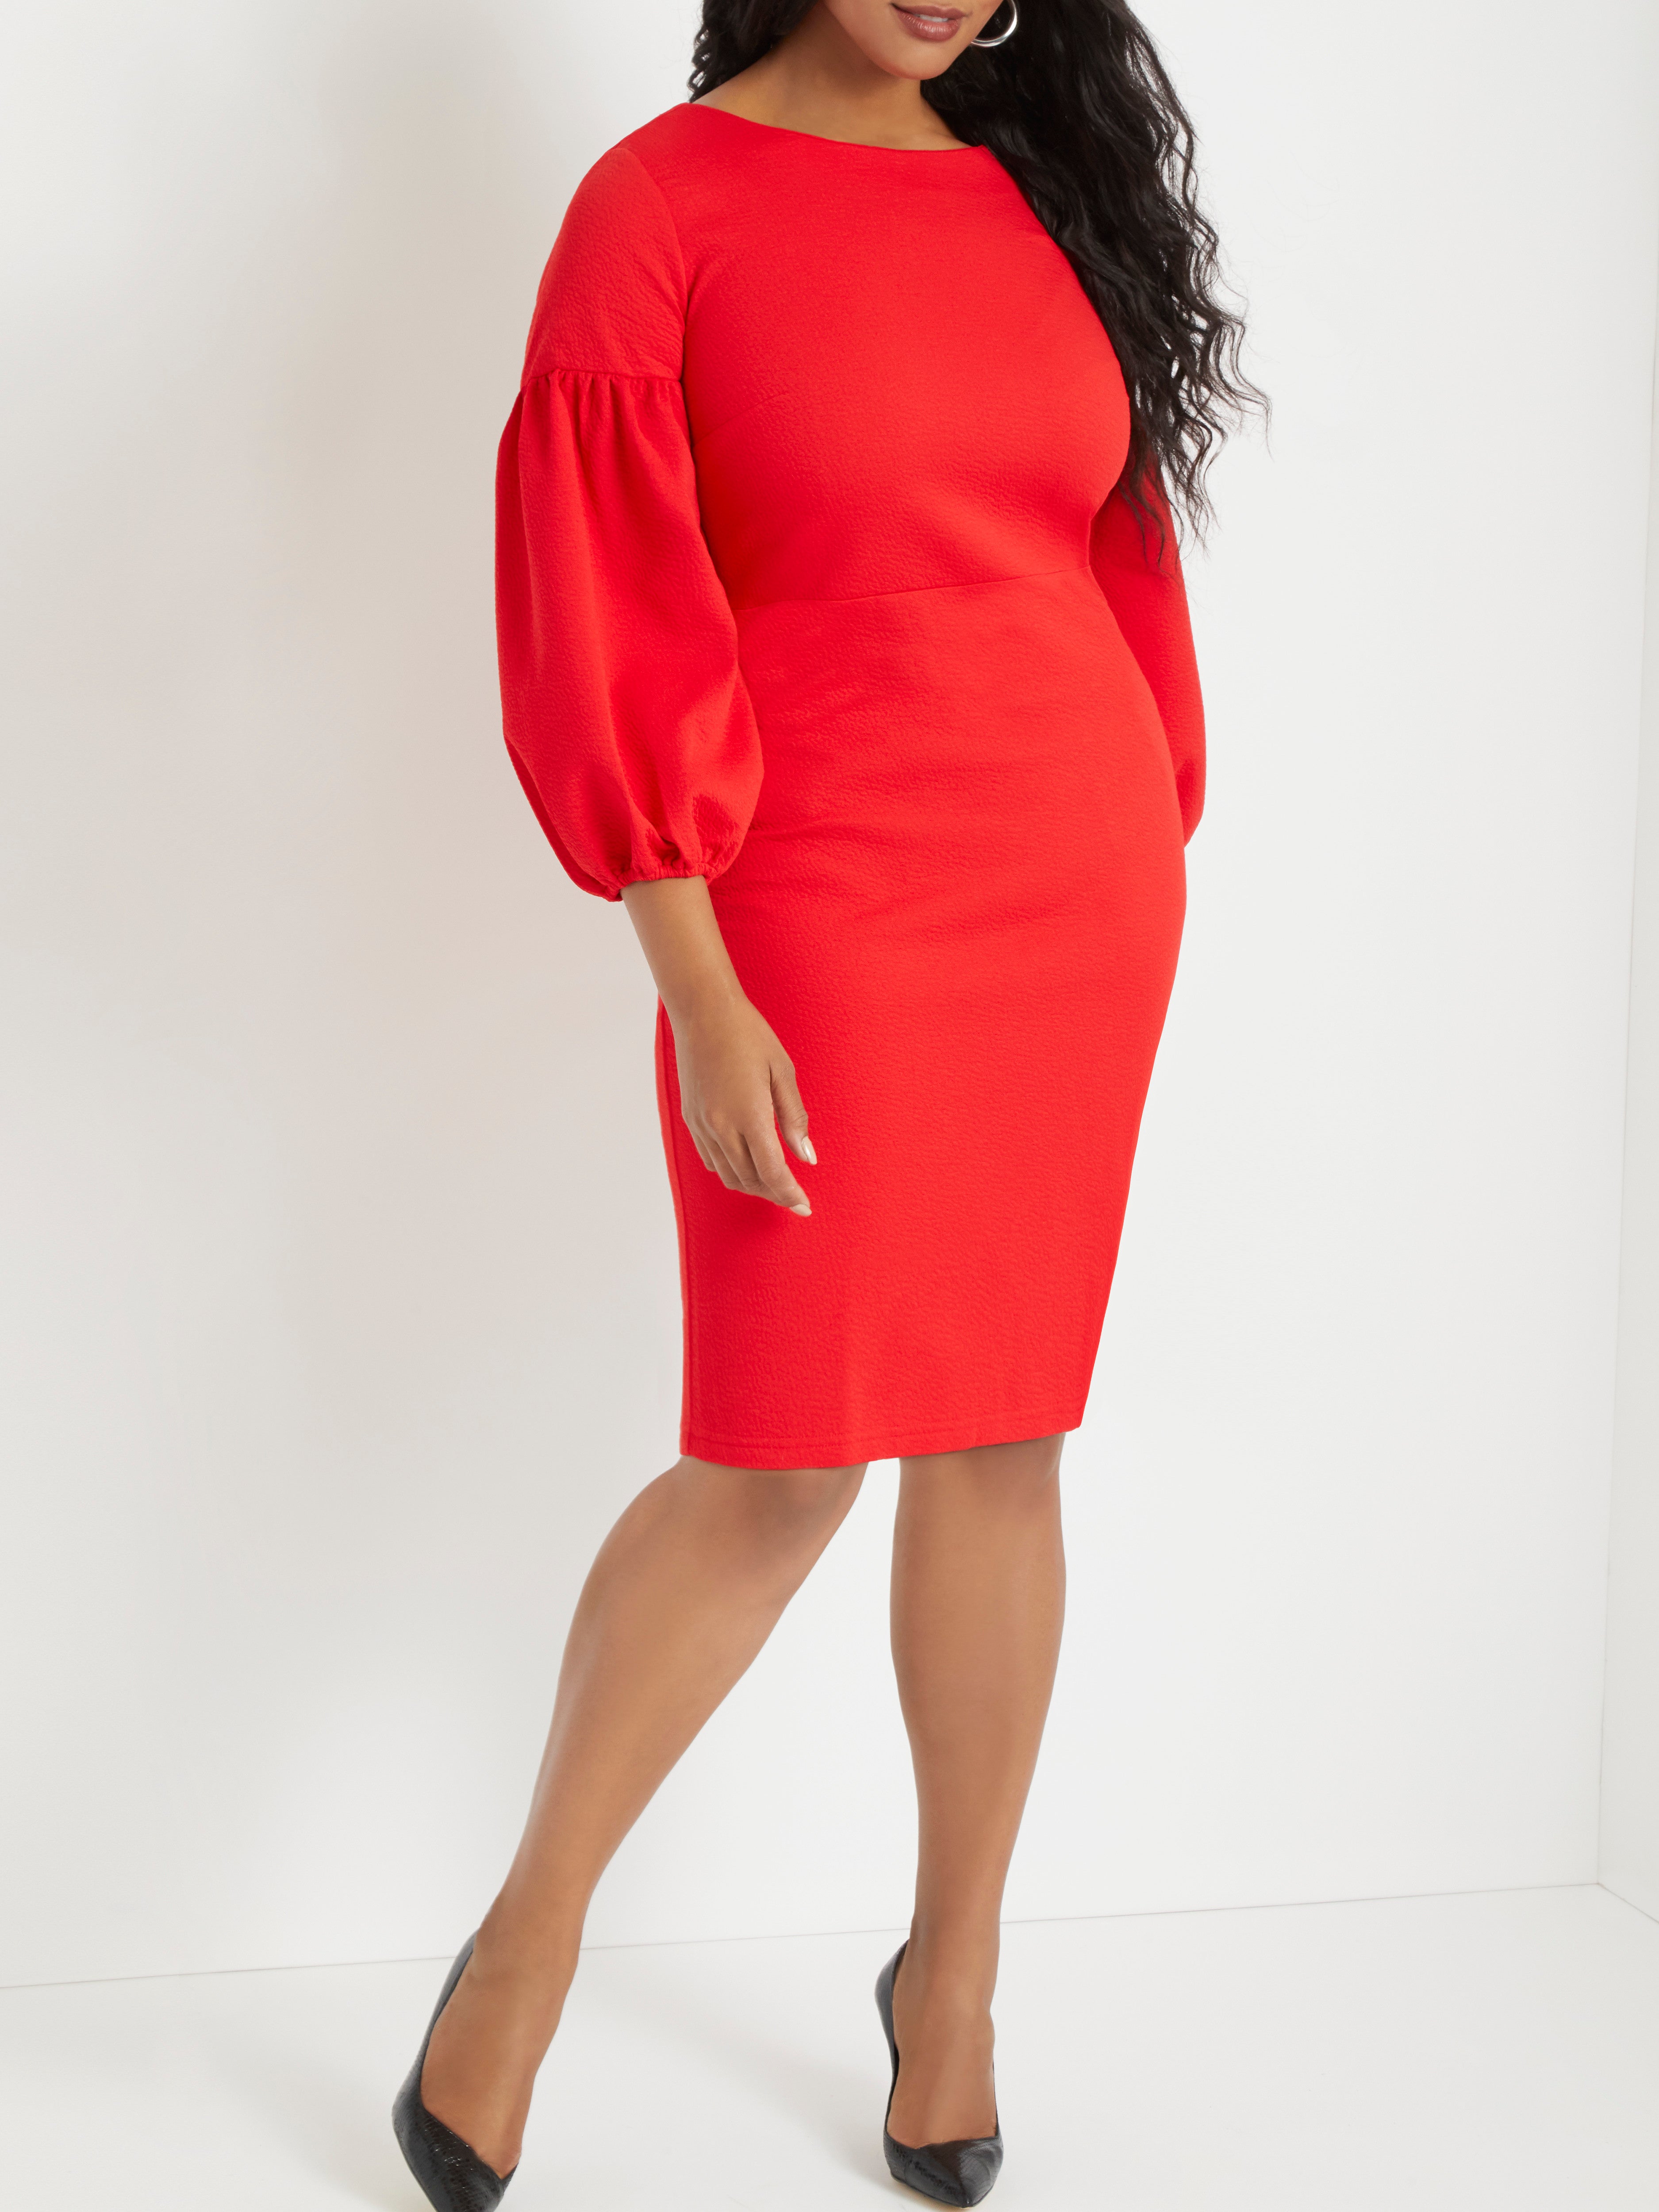 Oh Hey, Curvy Girl! These Gems From Eloquii Are Going For Way Less and You Don't Want To Miss Out